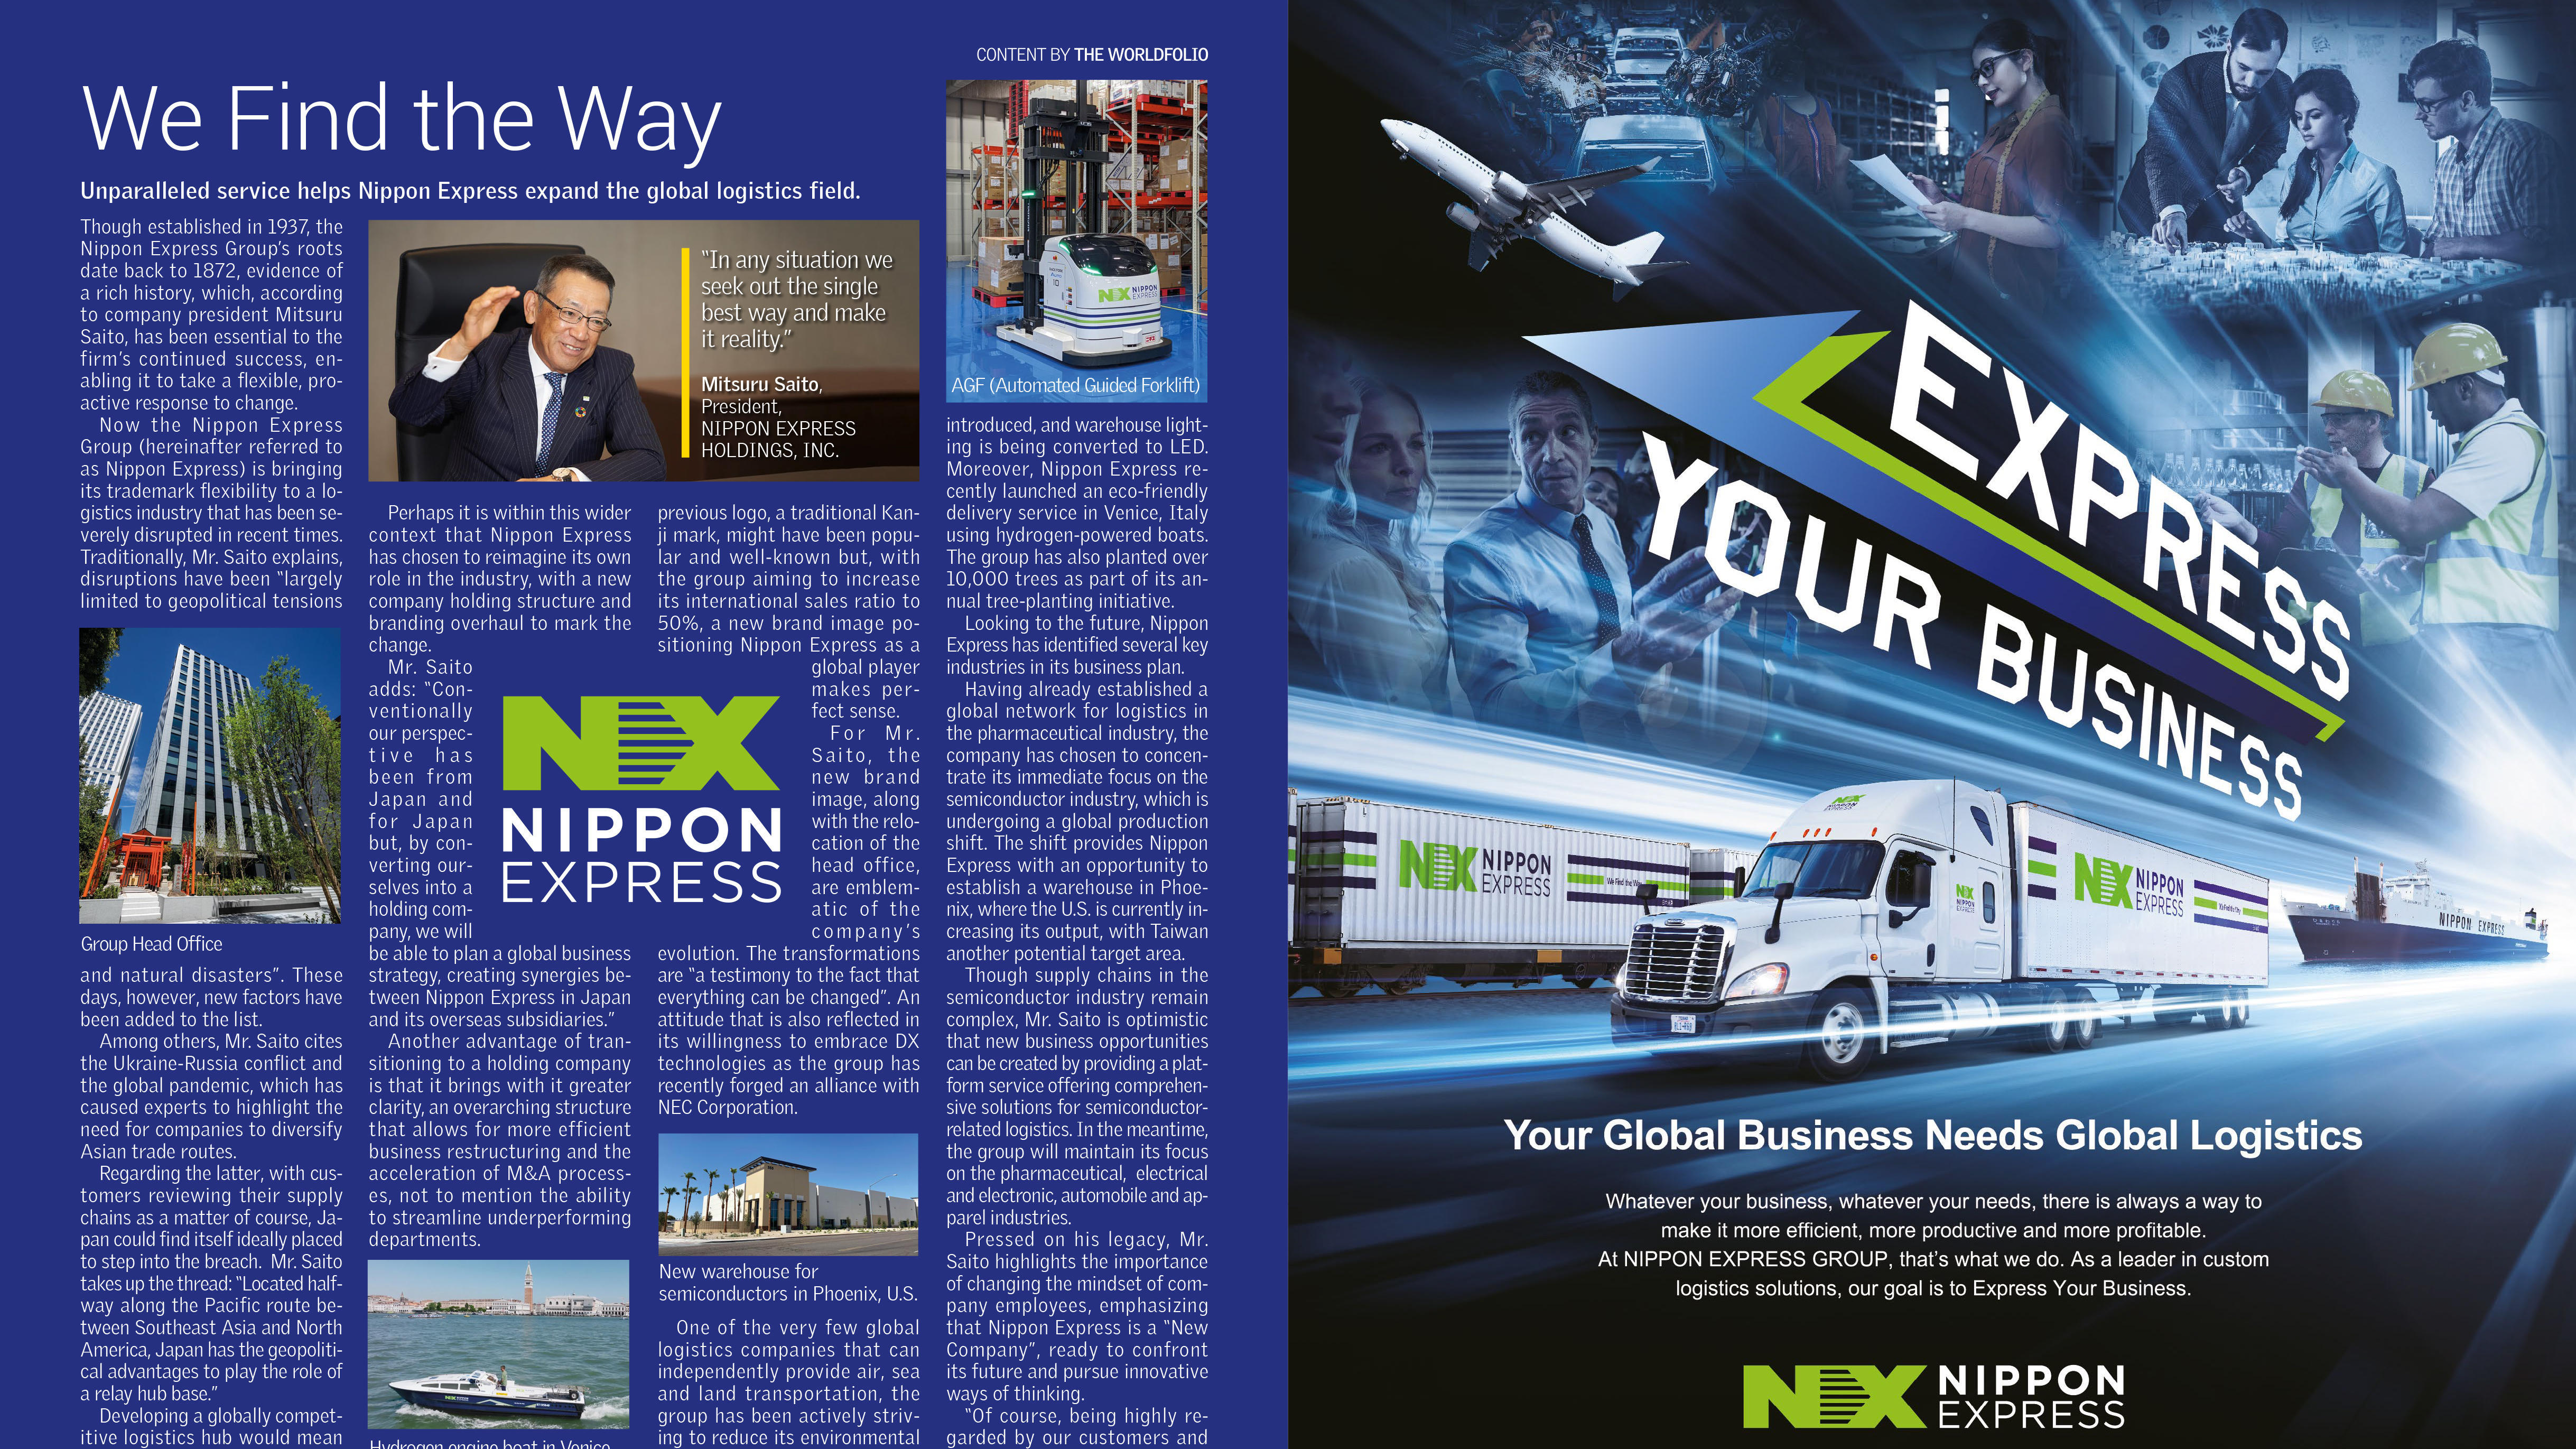 Unparalleled service helps Nippon Express expand the global logistics field.